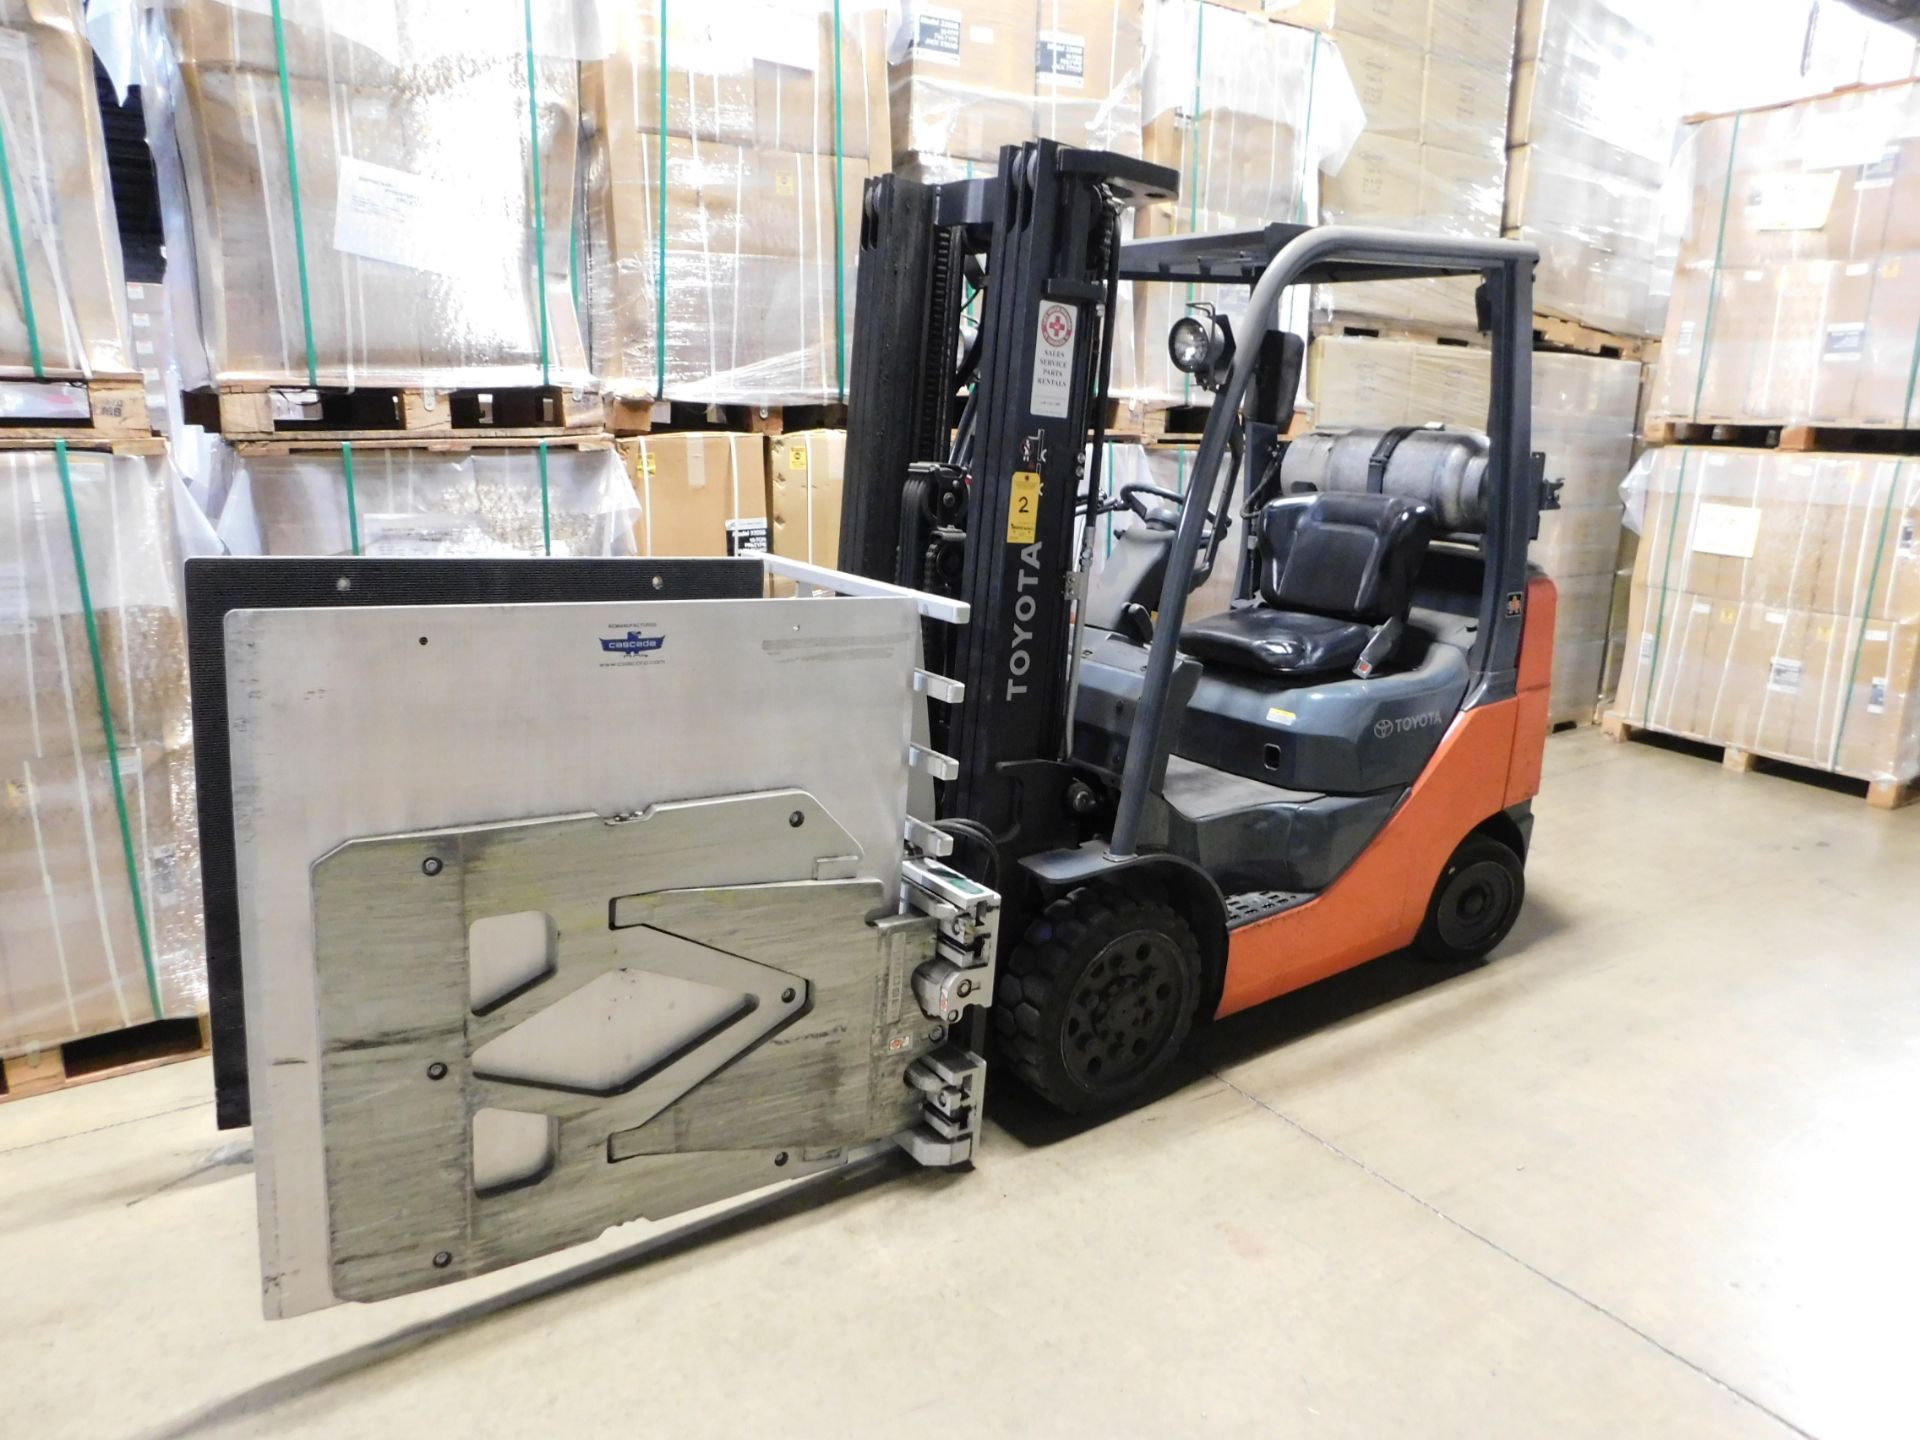 2010 Toyota Forklift, Model 8FGCU25, s/n 27407, 7,257 hrs., with Cascade Model R35D-CCS Clamp, 3,500